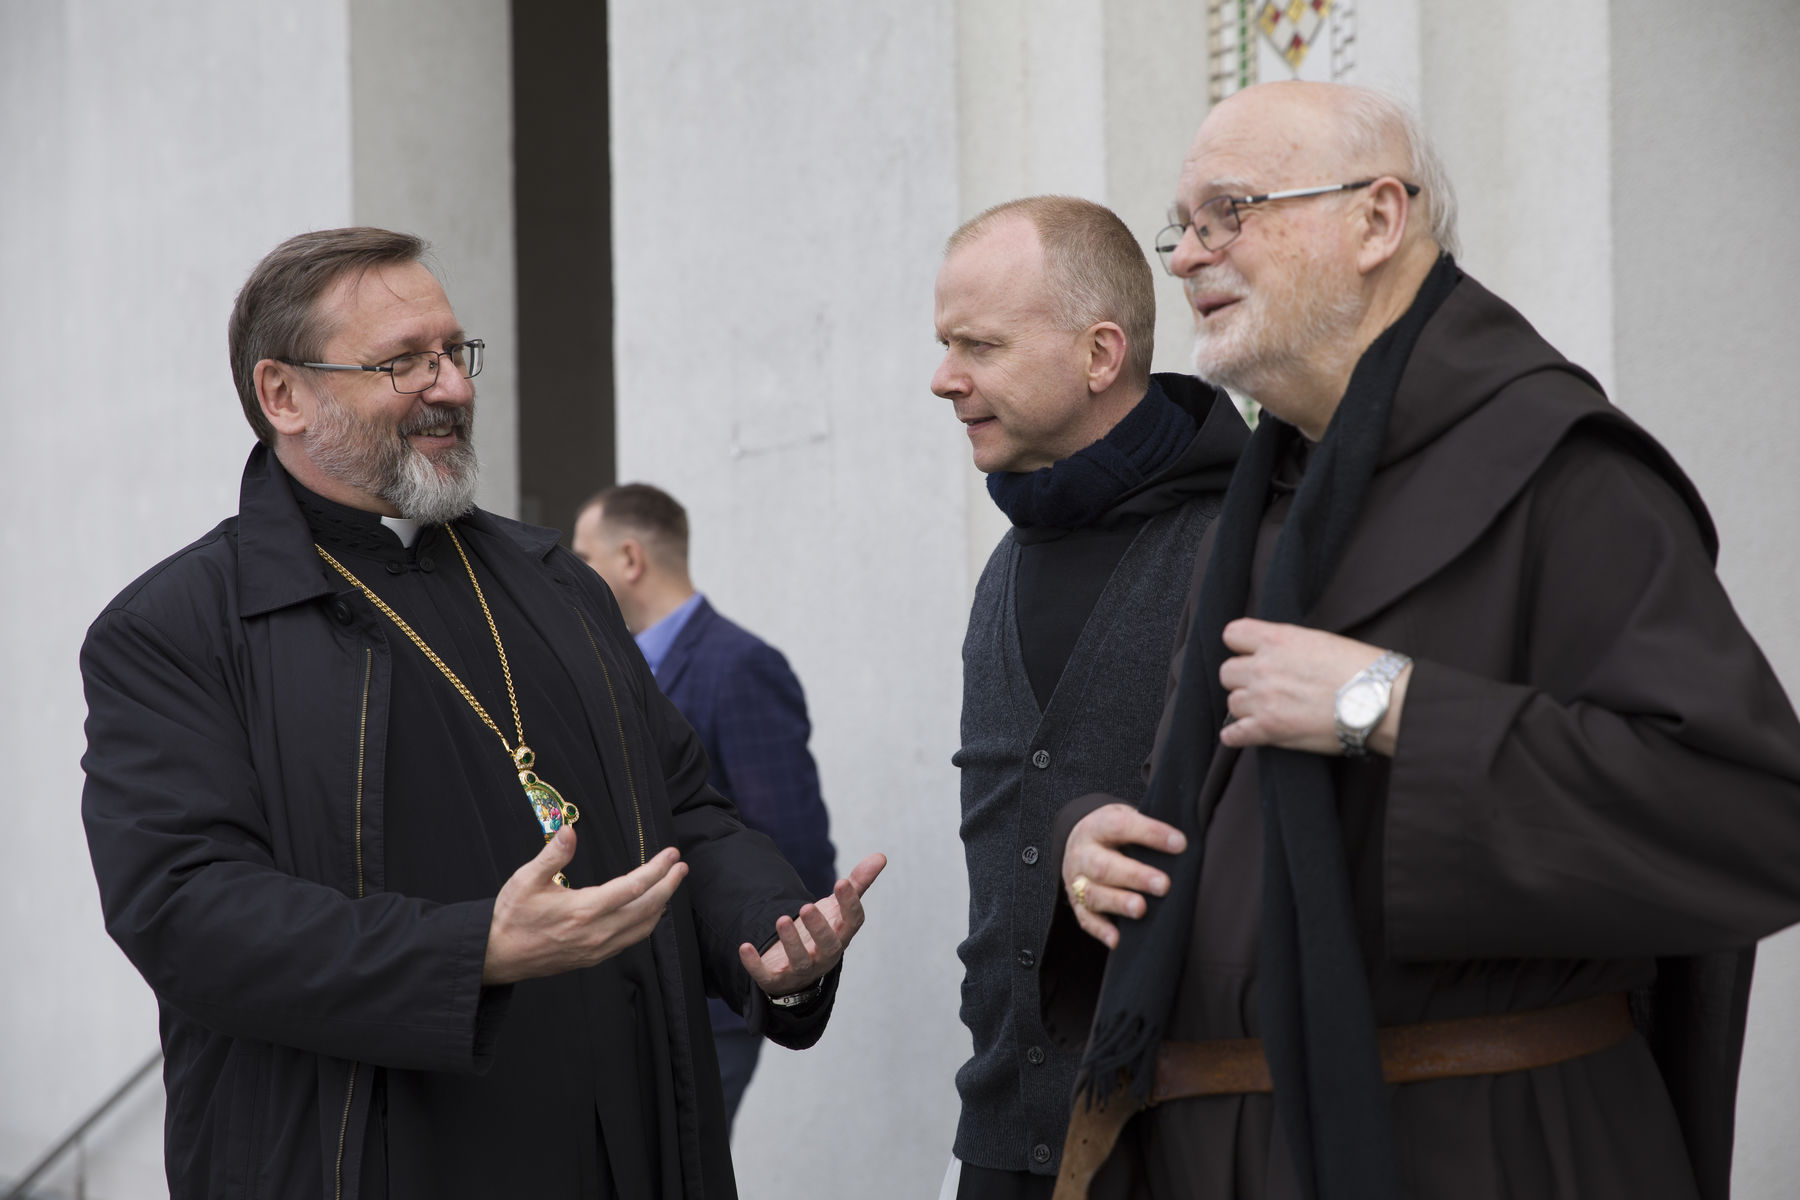 The delegation of the Scandinavian Bishops’ Conference arrives in Kyiv